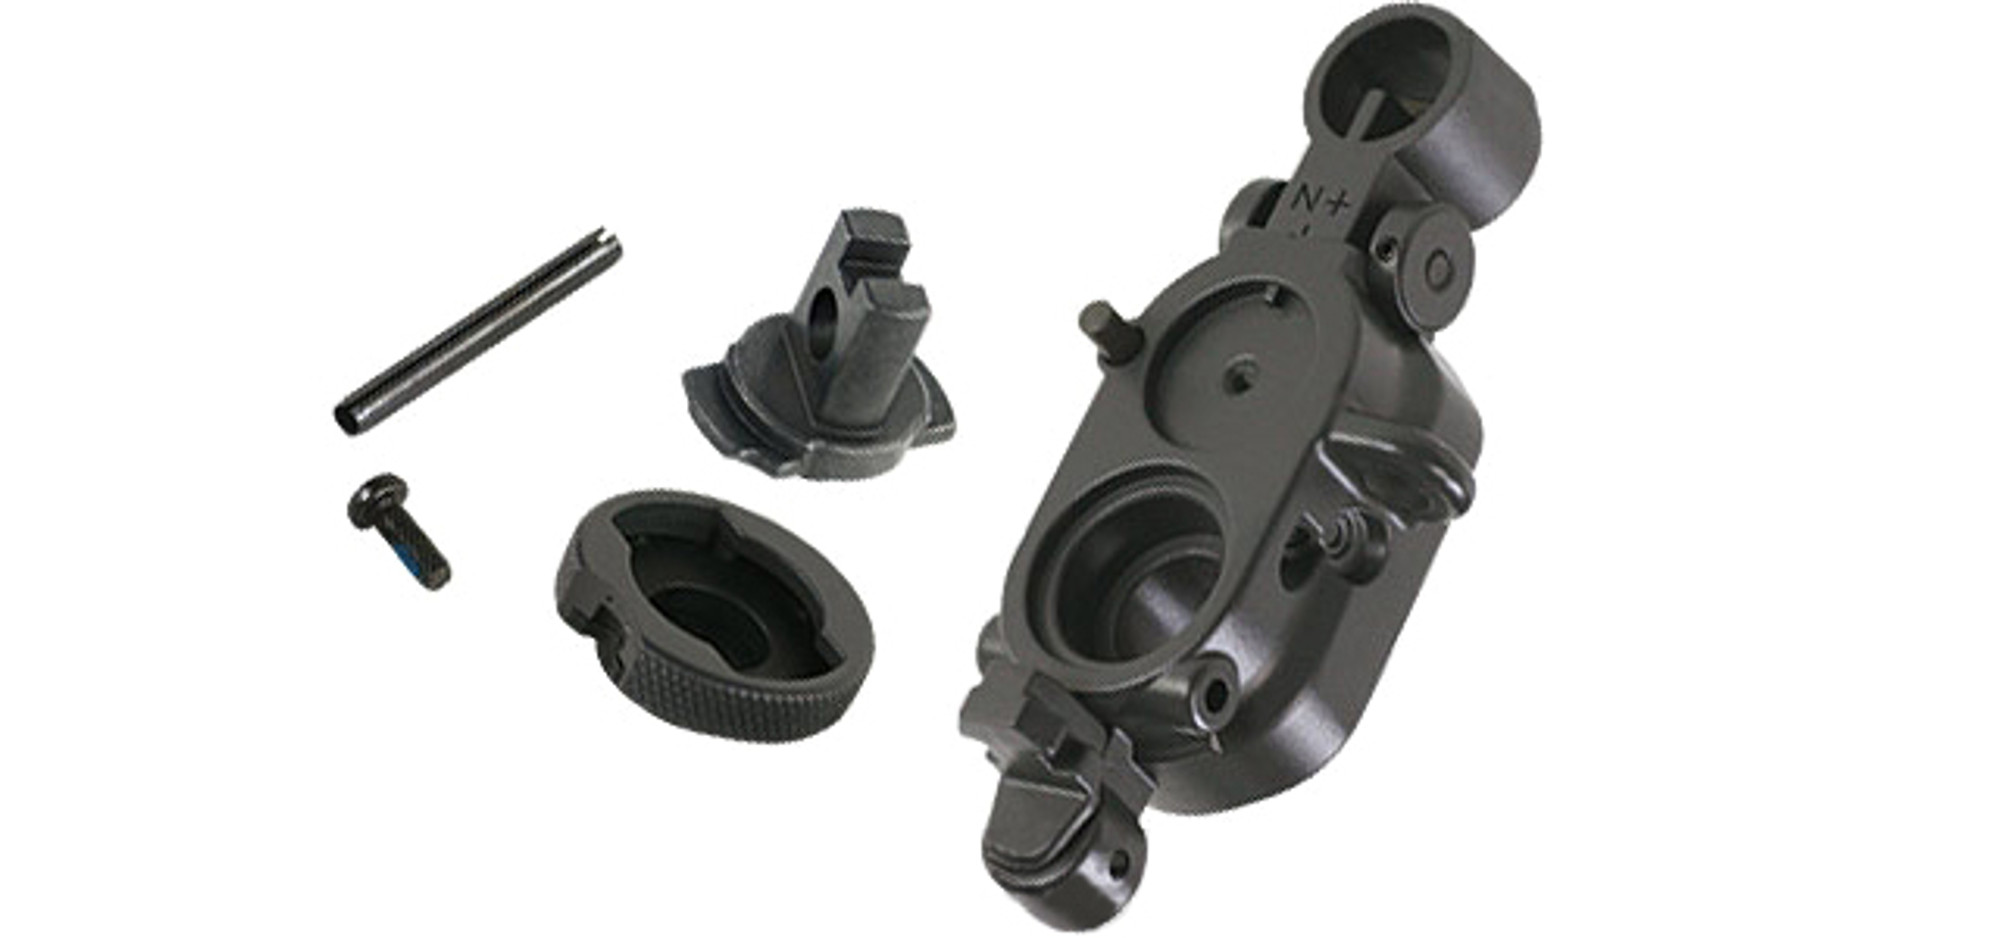 ICS Front Sight Assembly for SG 552 Series Airsoft AEG Rifles